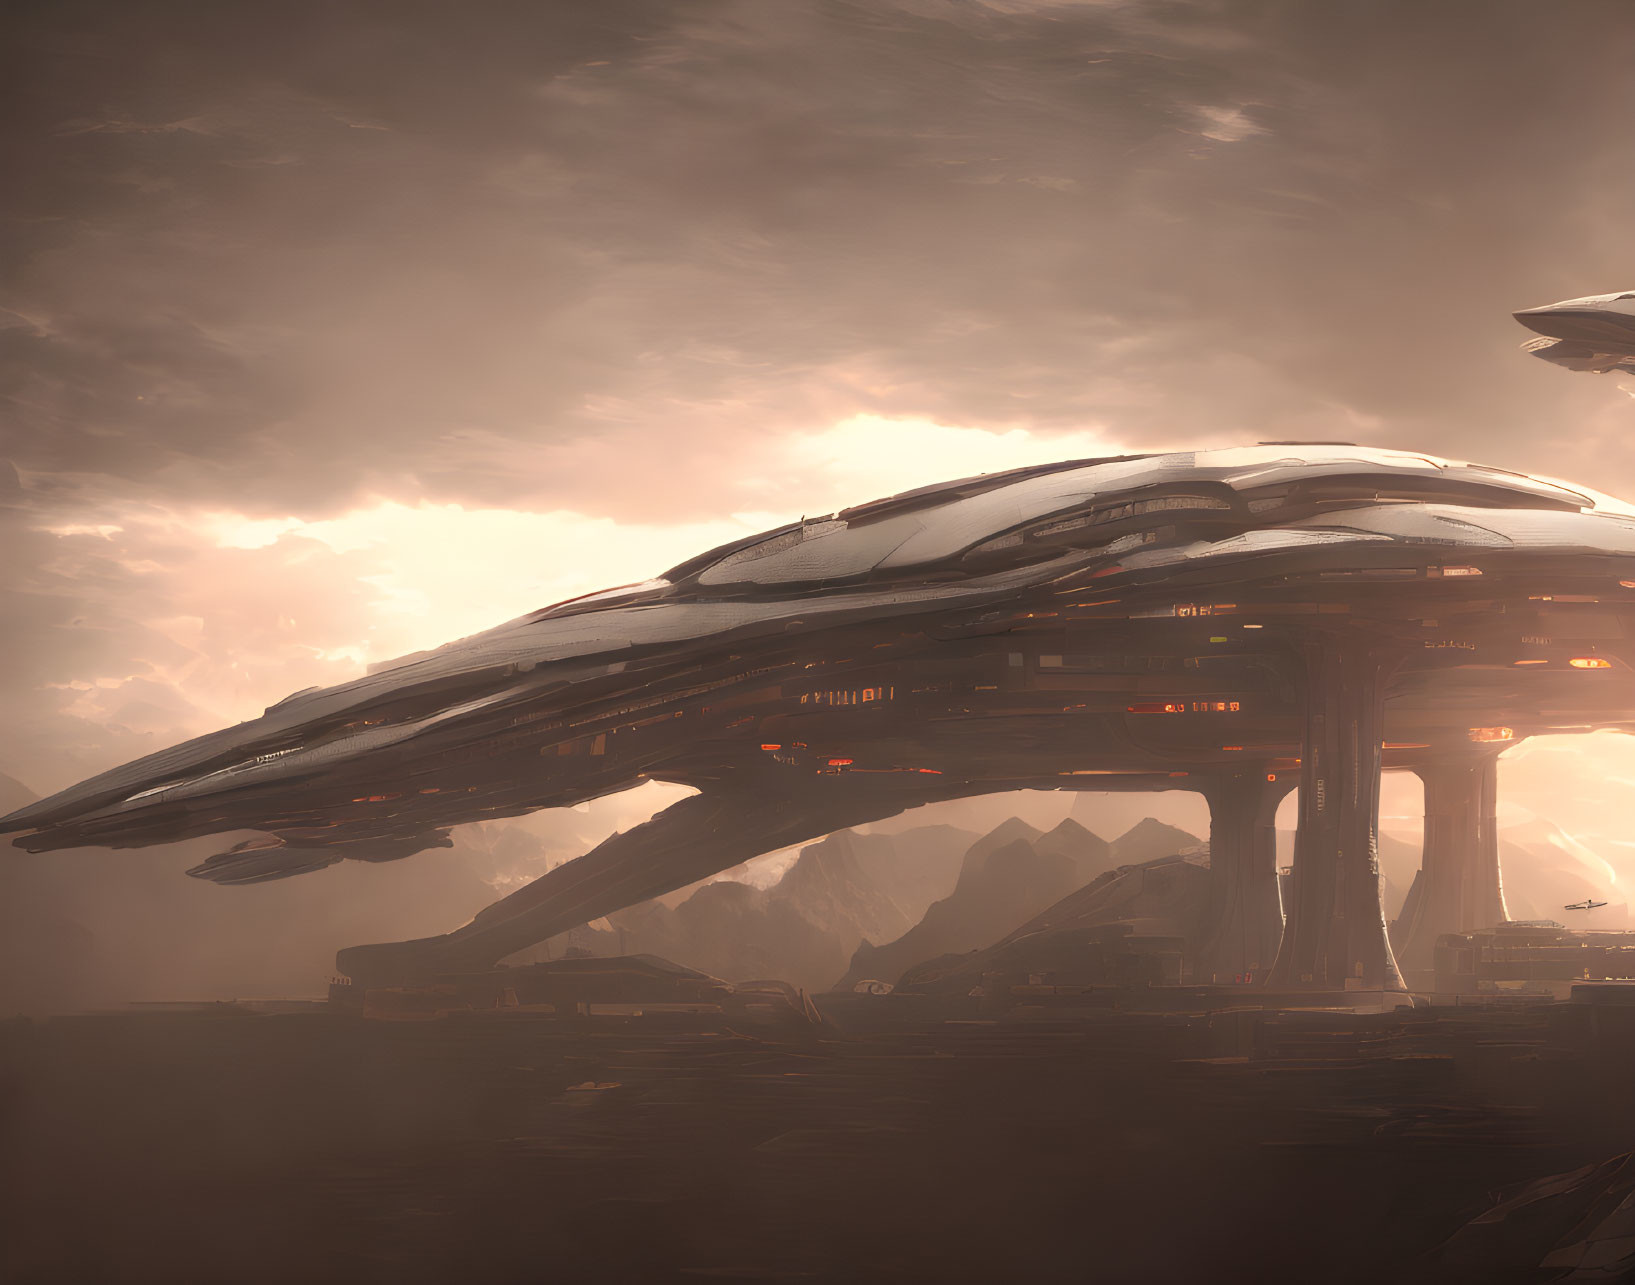 Curved futuristic spaceship on landing pads in misty mountainous landscape at dusk